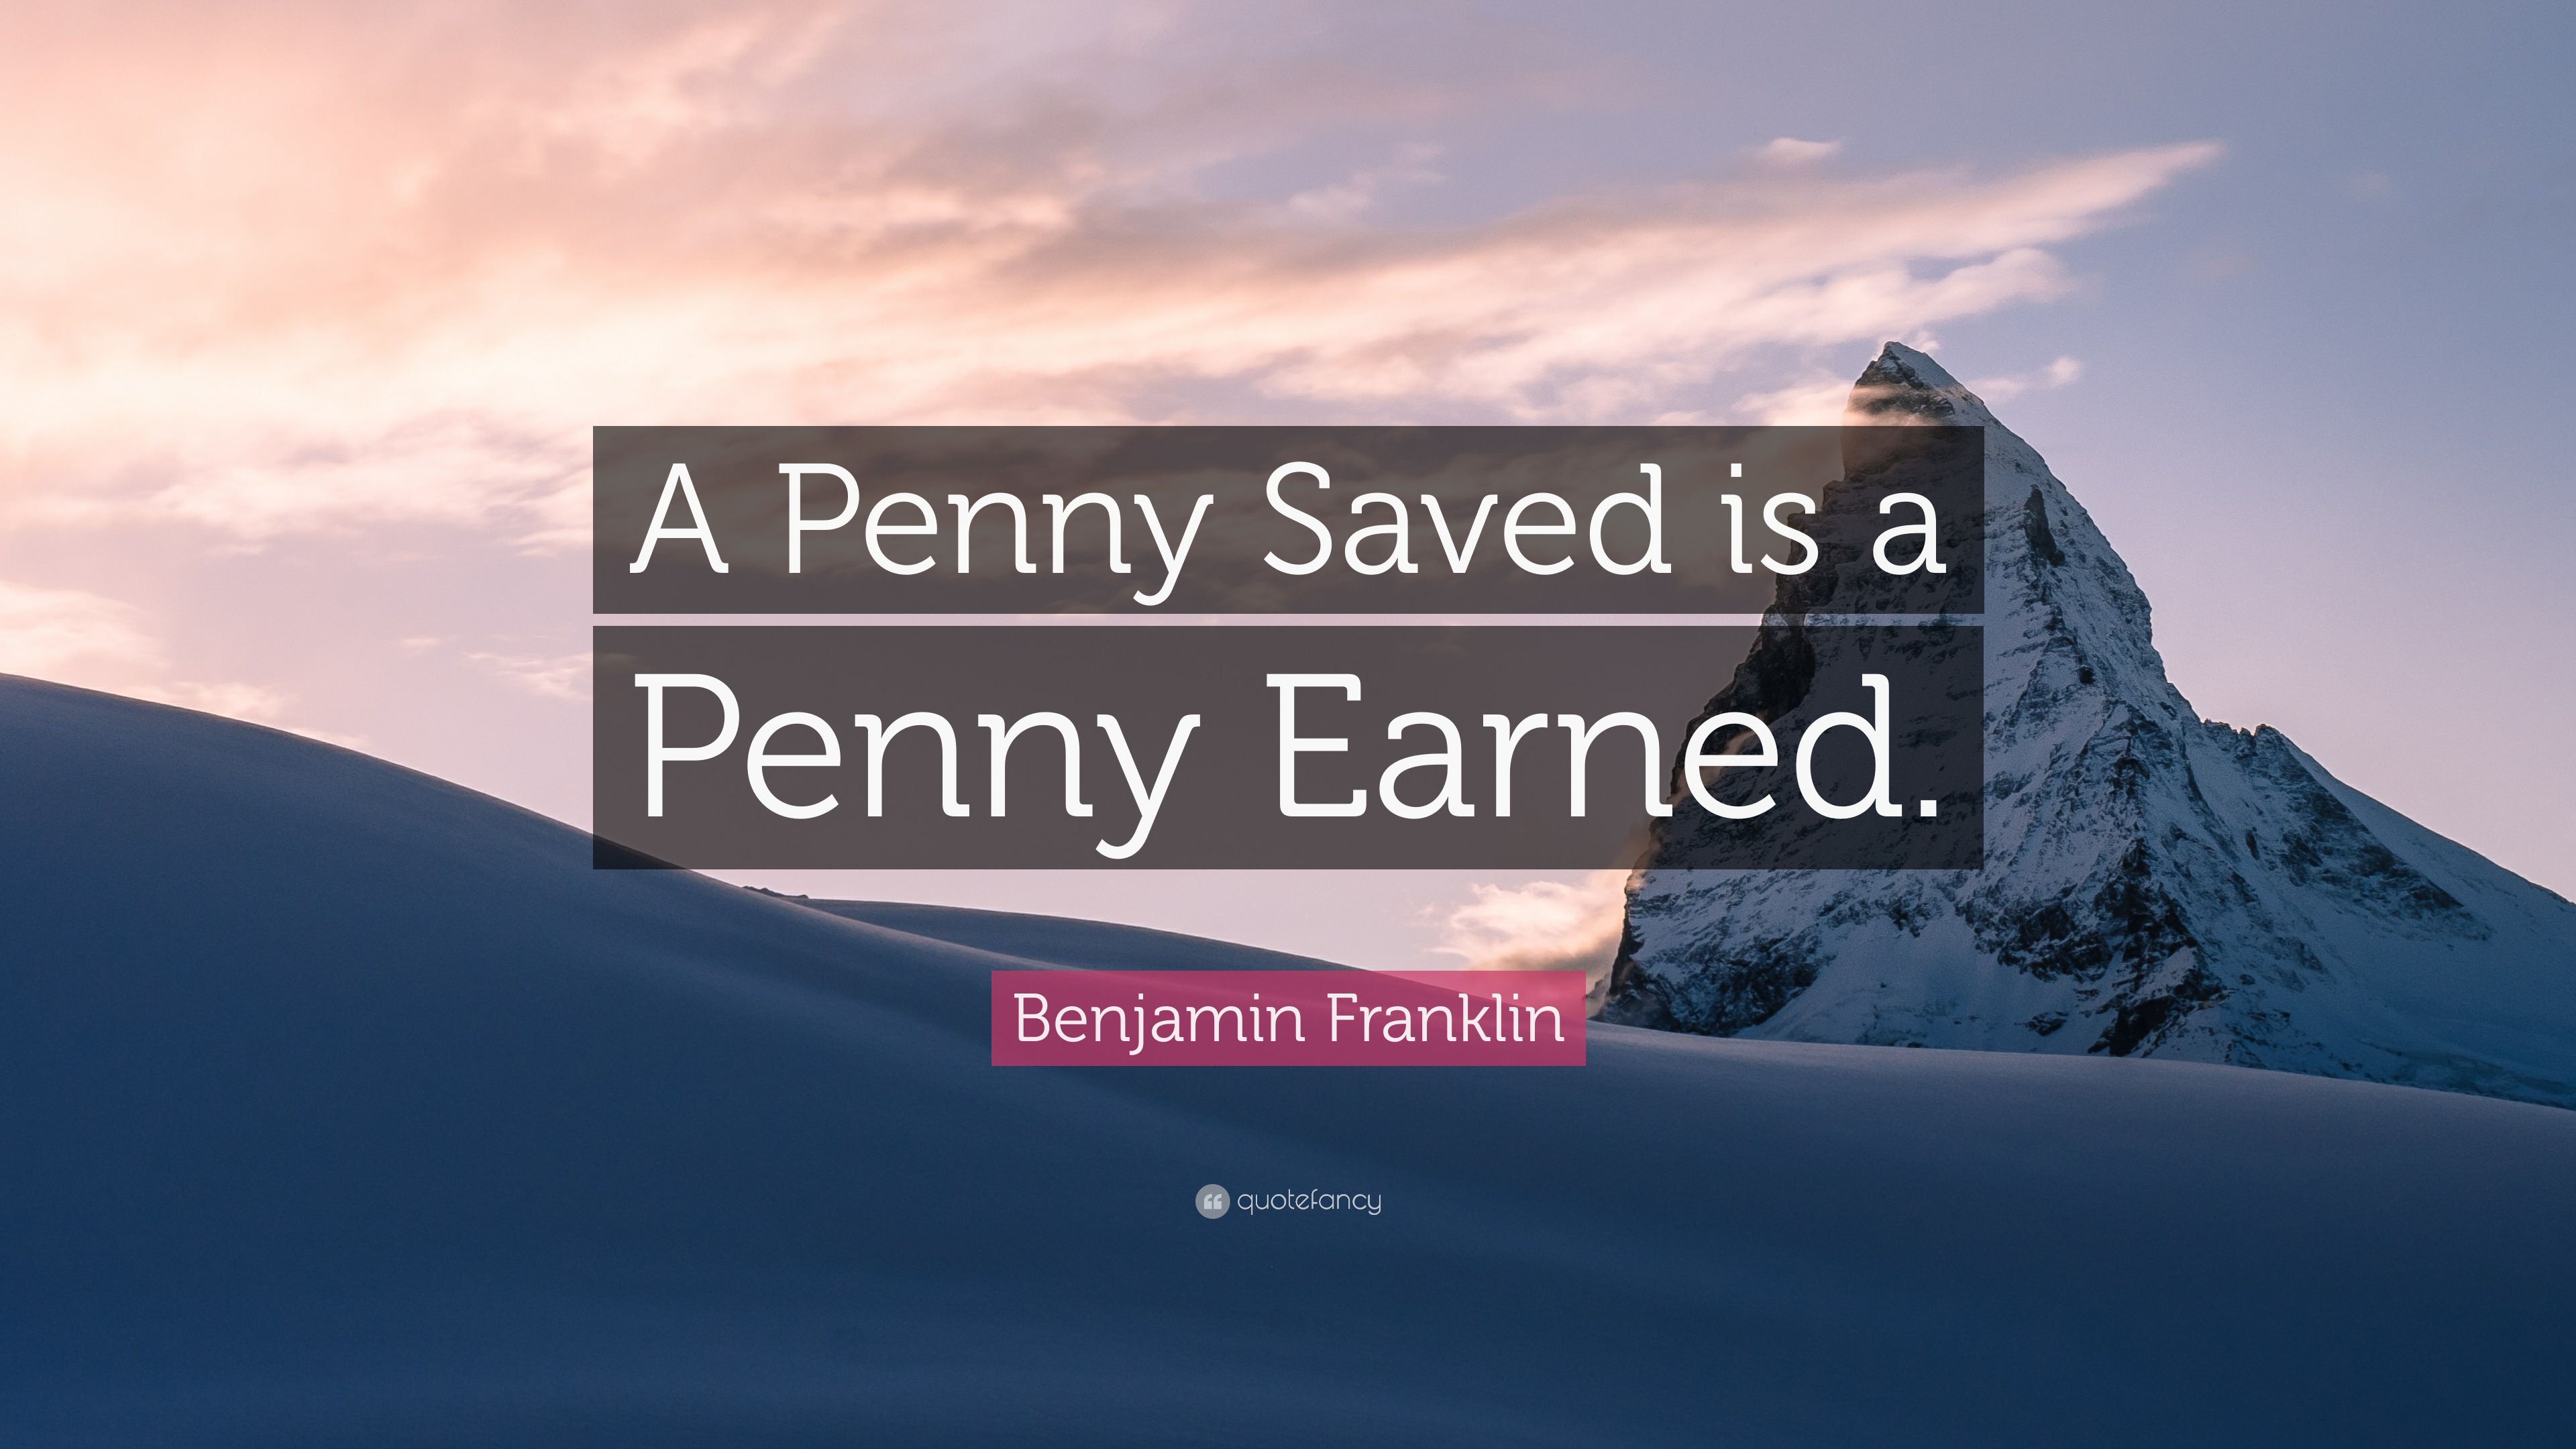 Benjamin Franklin Quote: "A Penny Saved is a Penny Earned. 